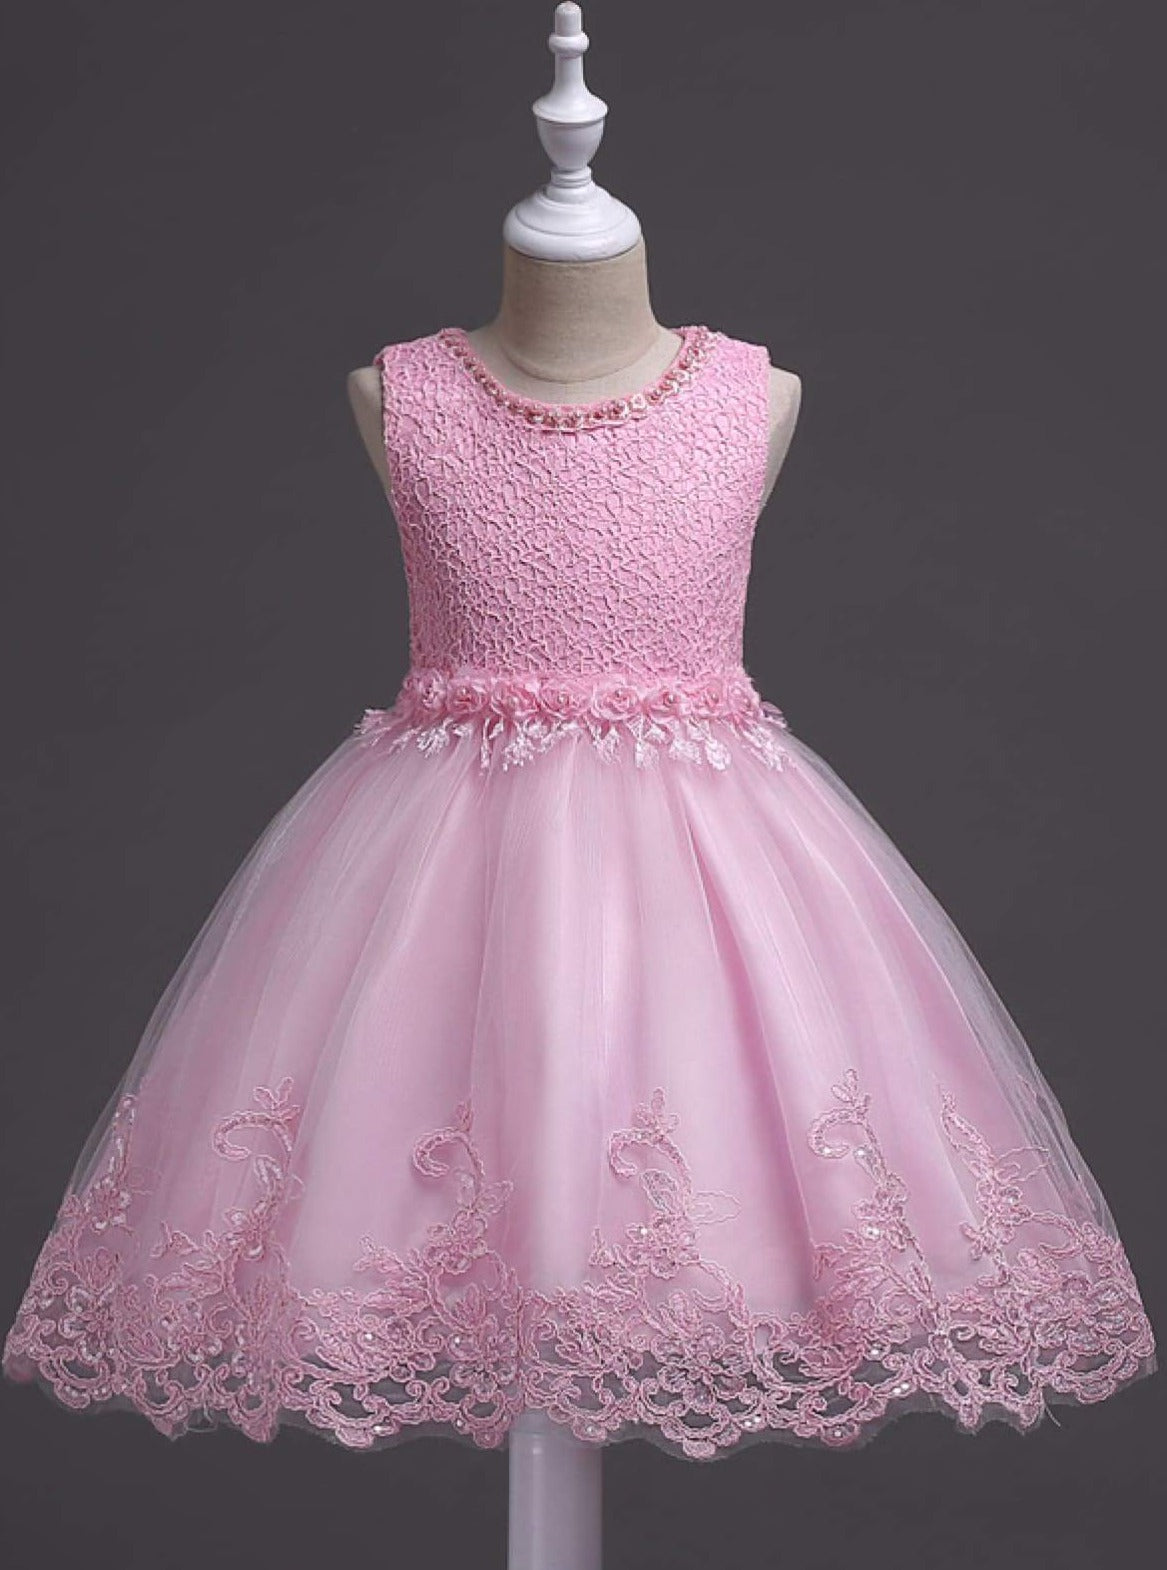 Girls sleeveless Embroidered Rose Pearl Flower Girl & Special Occasion Party Dress - Pink / 3T - Girls Spring Dressy Dress